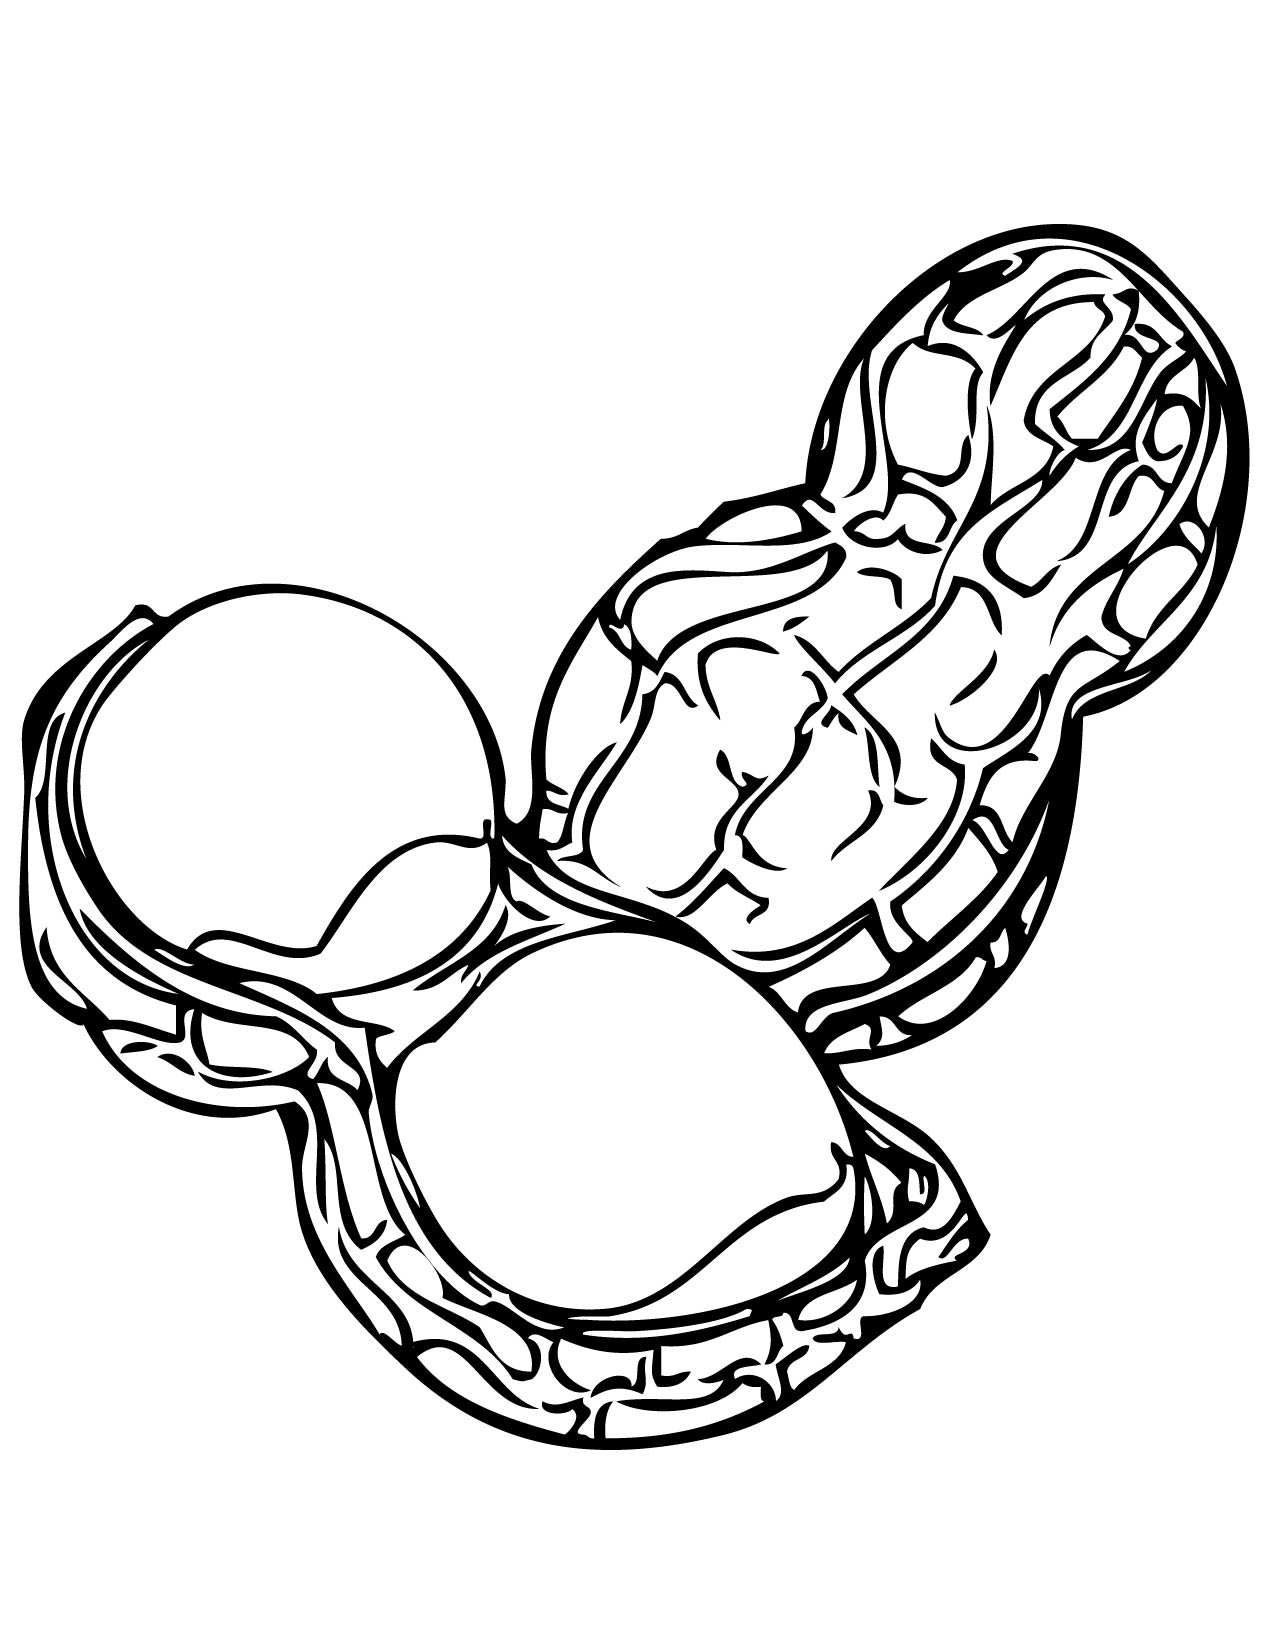 46 Peanut Butter And Jelly Coloring Pages   Free Cliparts That You Can